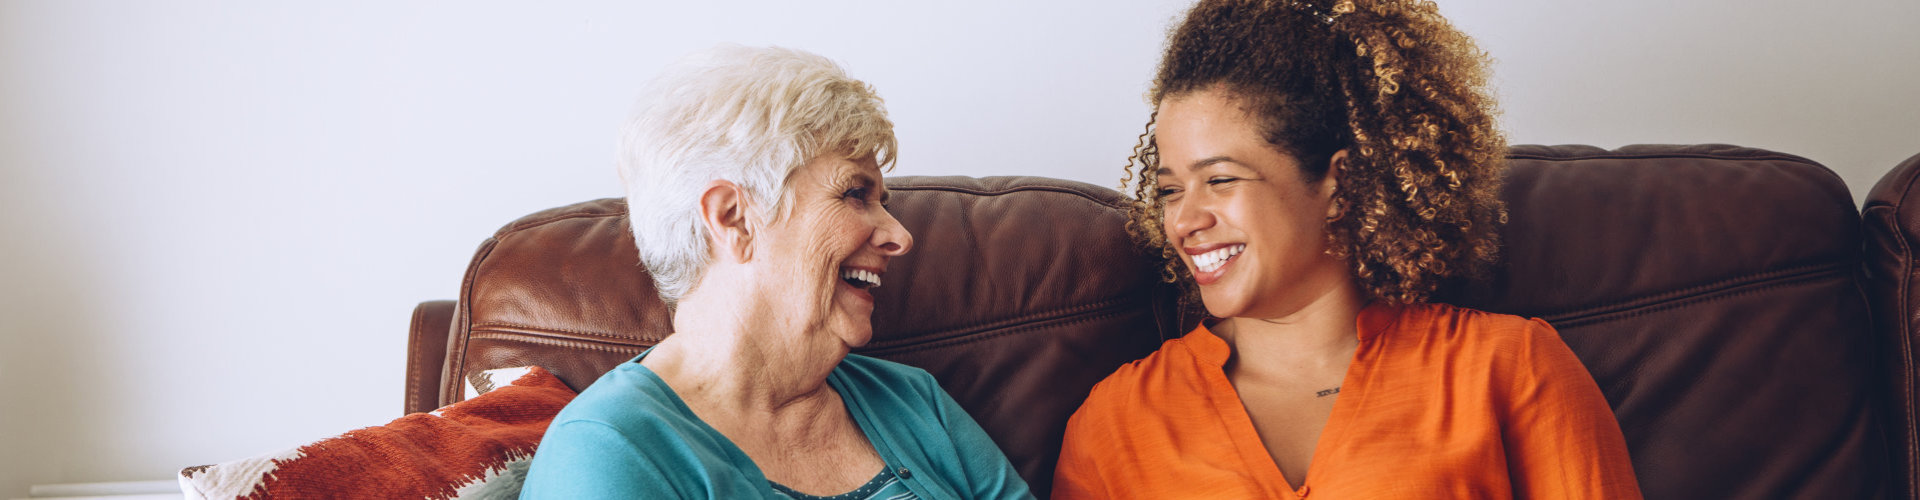 senior woman and her caregiver laughing